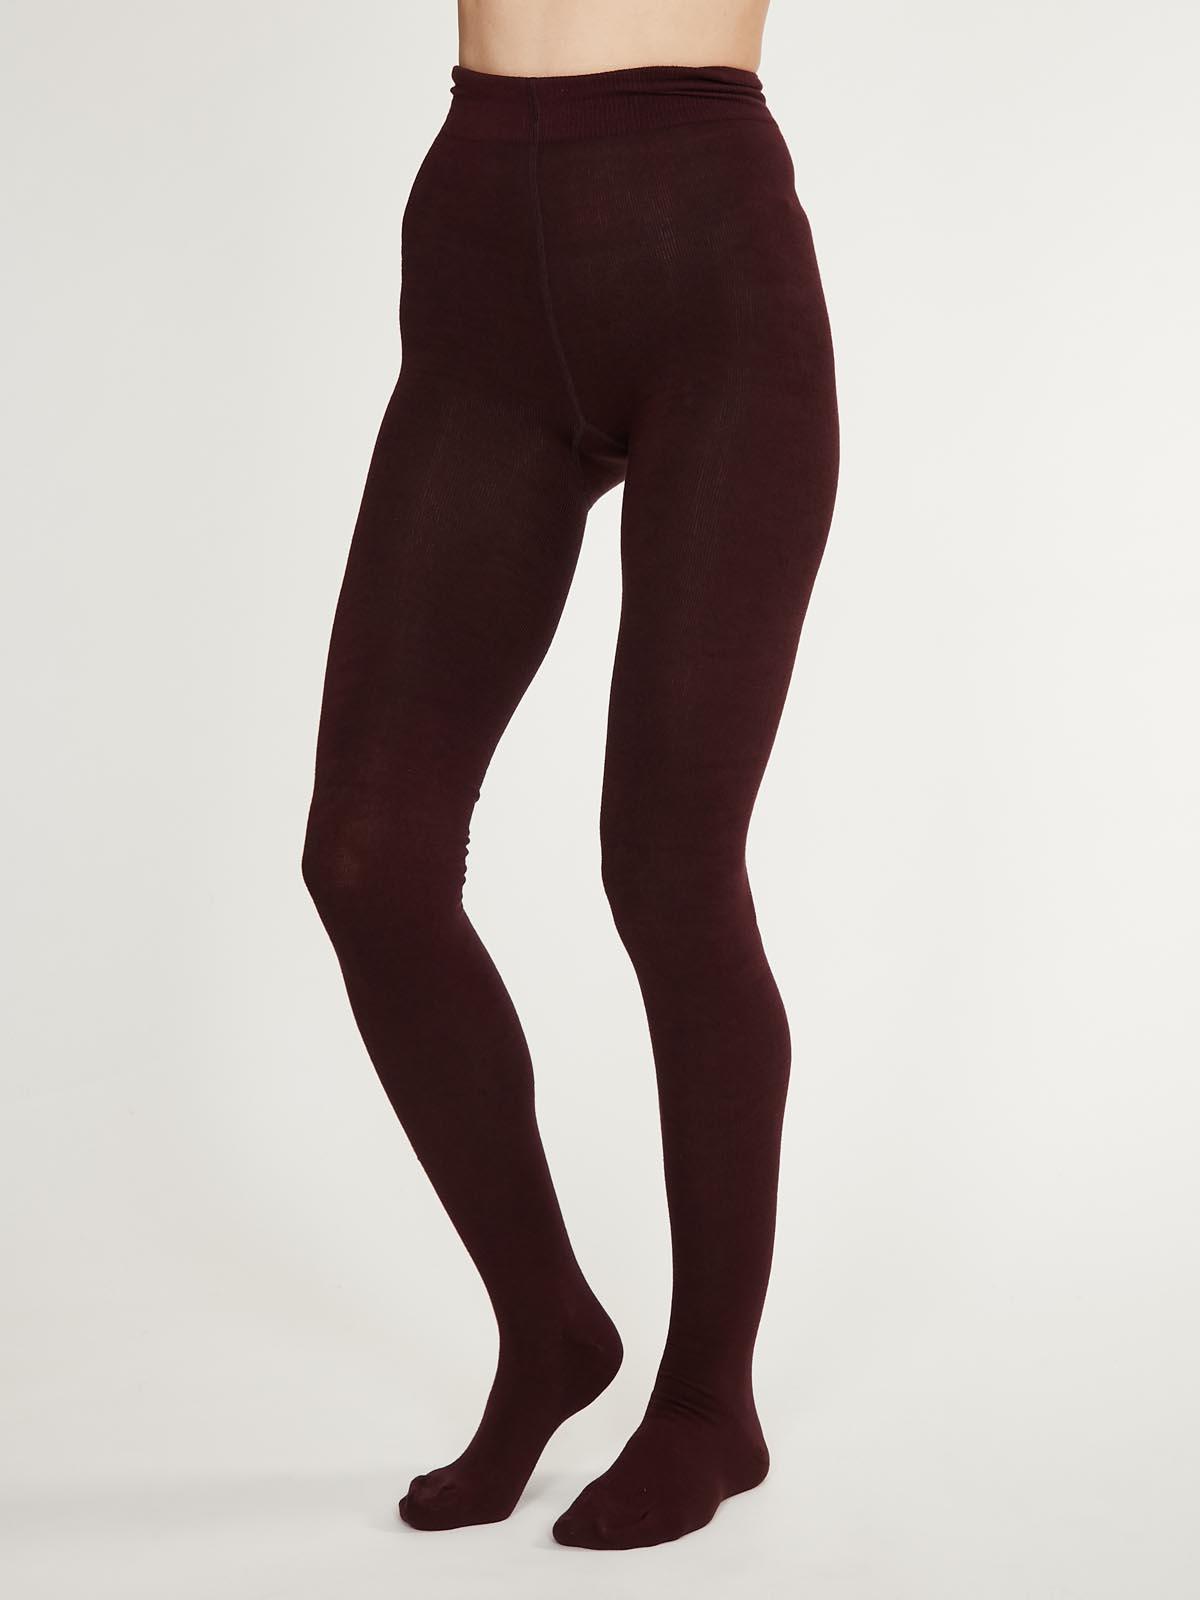 Bamboo Essential Plain Tights - Thought Clothing UK